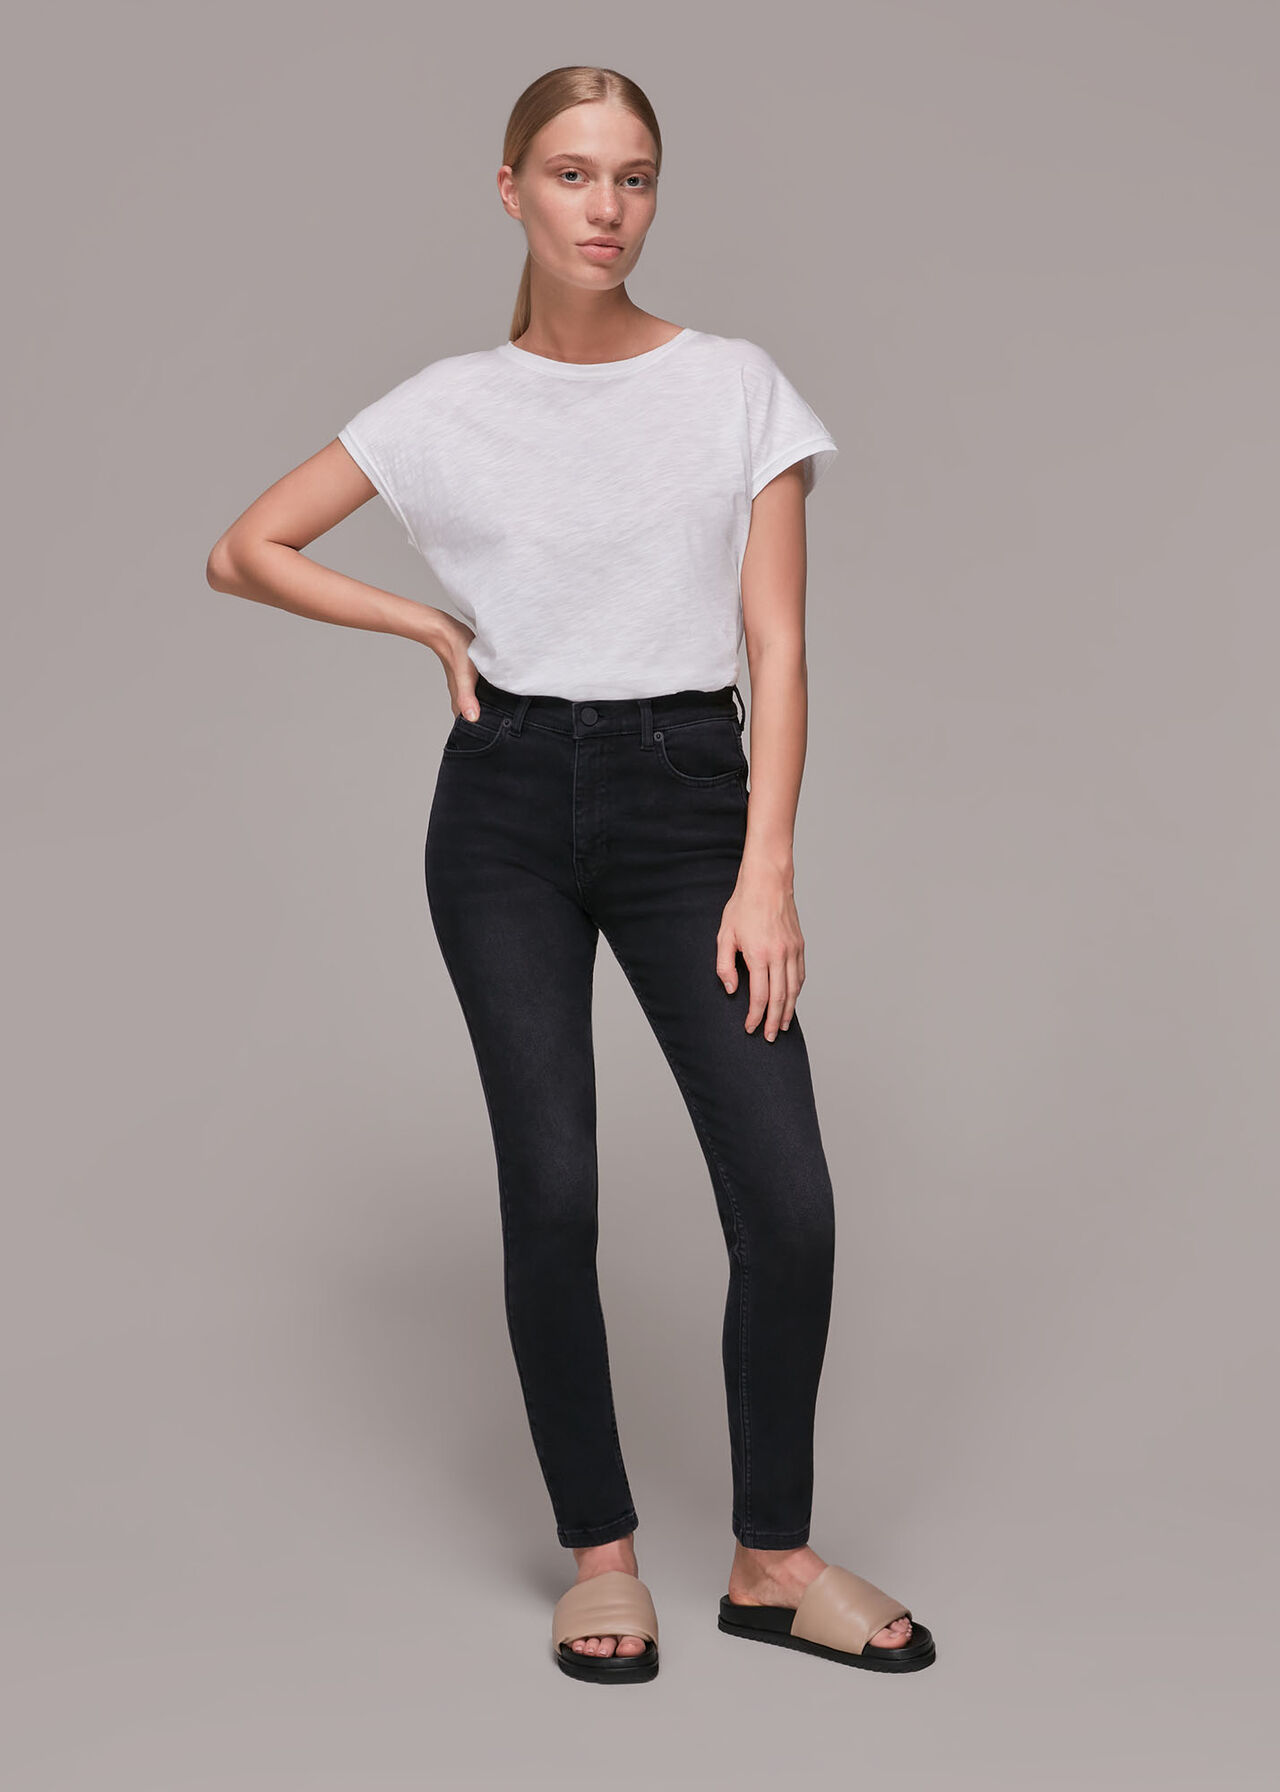 Black Mid-Rise Stretchy Skinny Jeans, Whistles